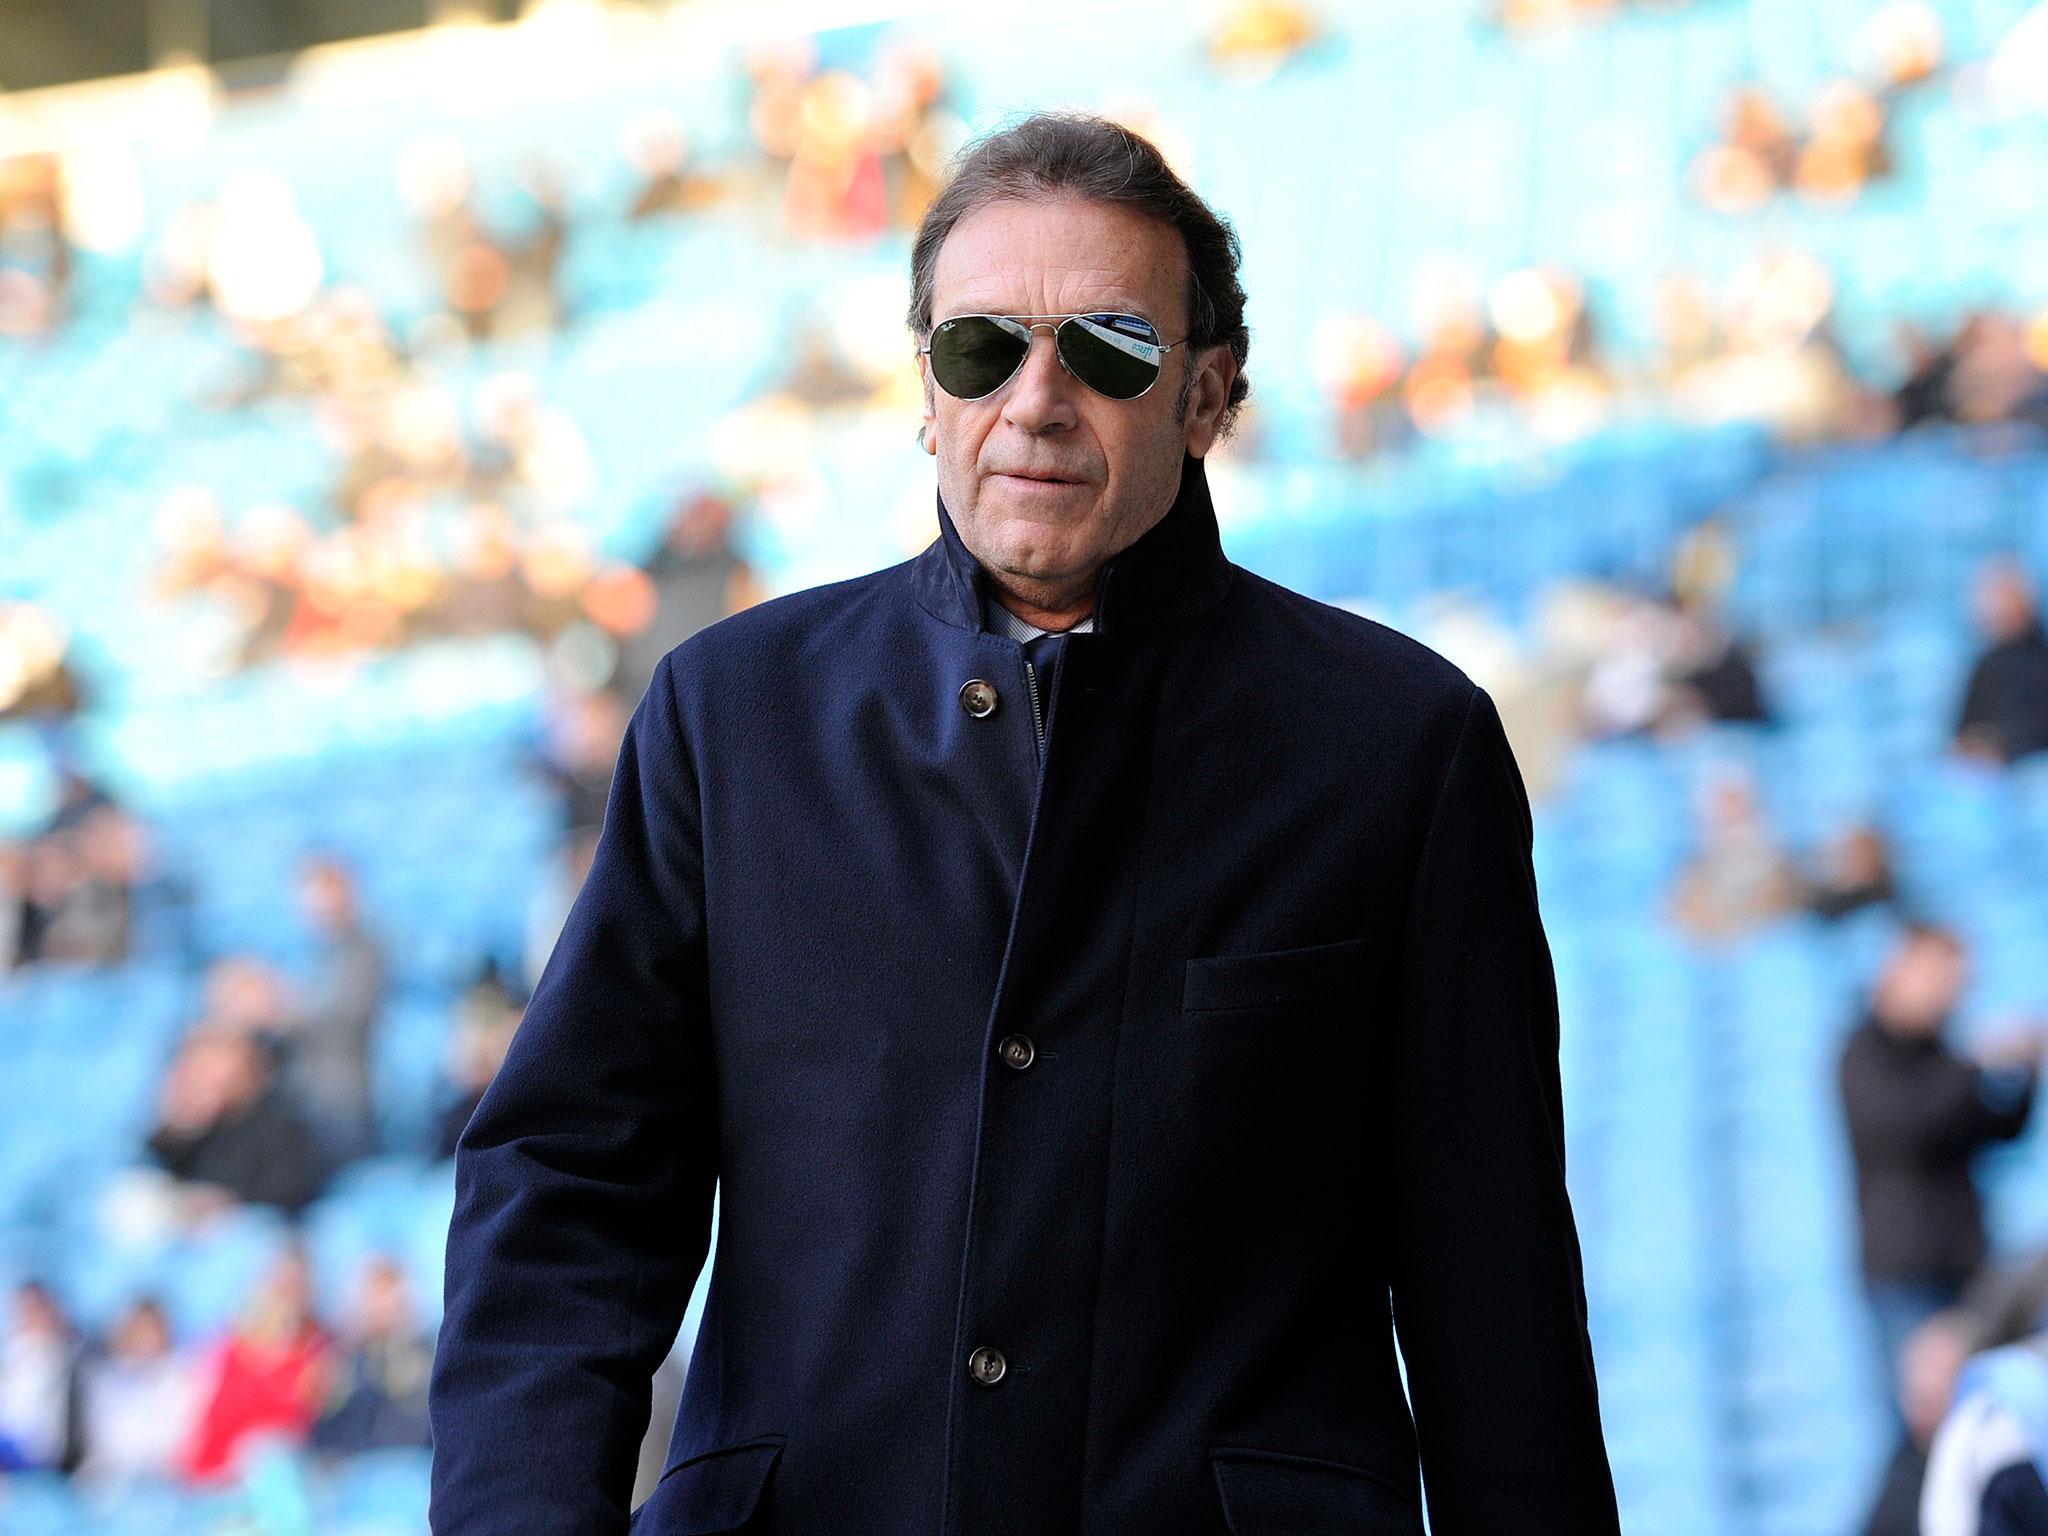 Cellino bought a 75 per cent stake in Leeds from previous owners Gulf Finance House in 2014